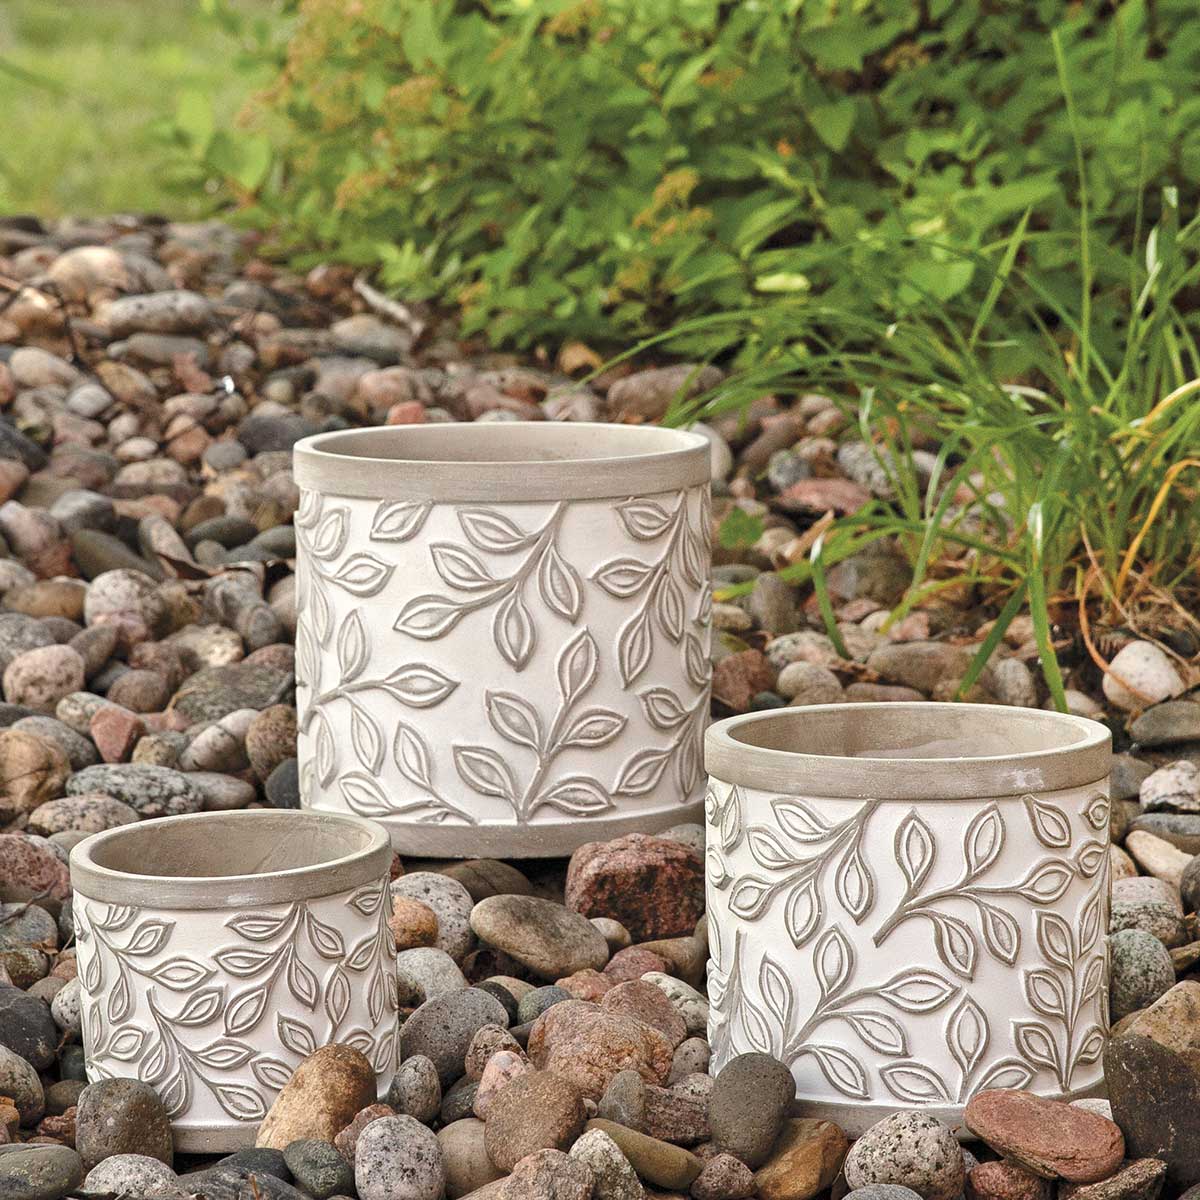 POT LAUREL LEAF GREY LARGE 6.25IN X 6IN WHITE CONCRETE - Click Image to Close